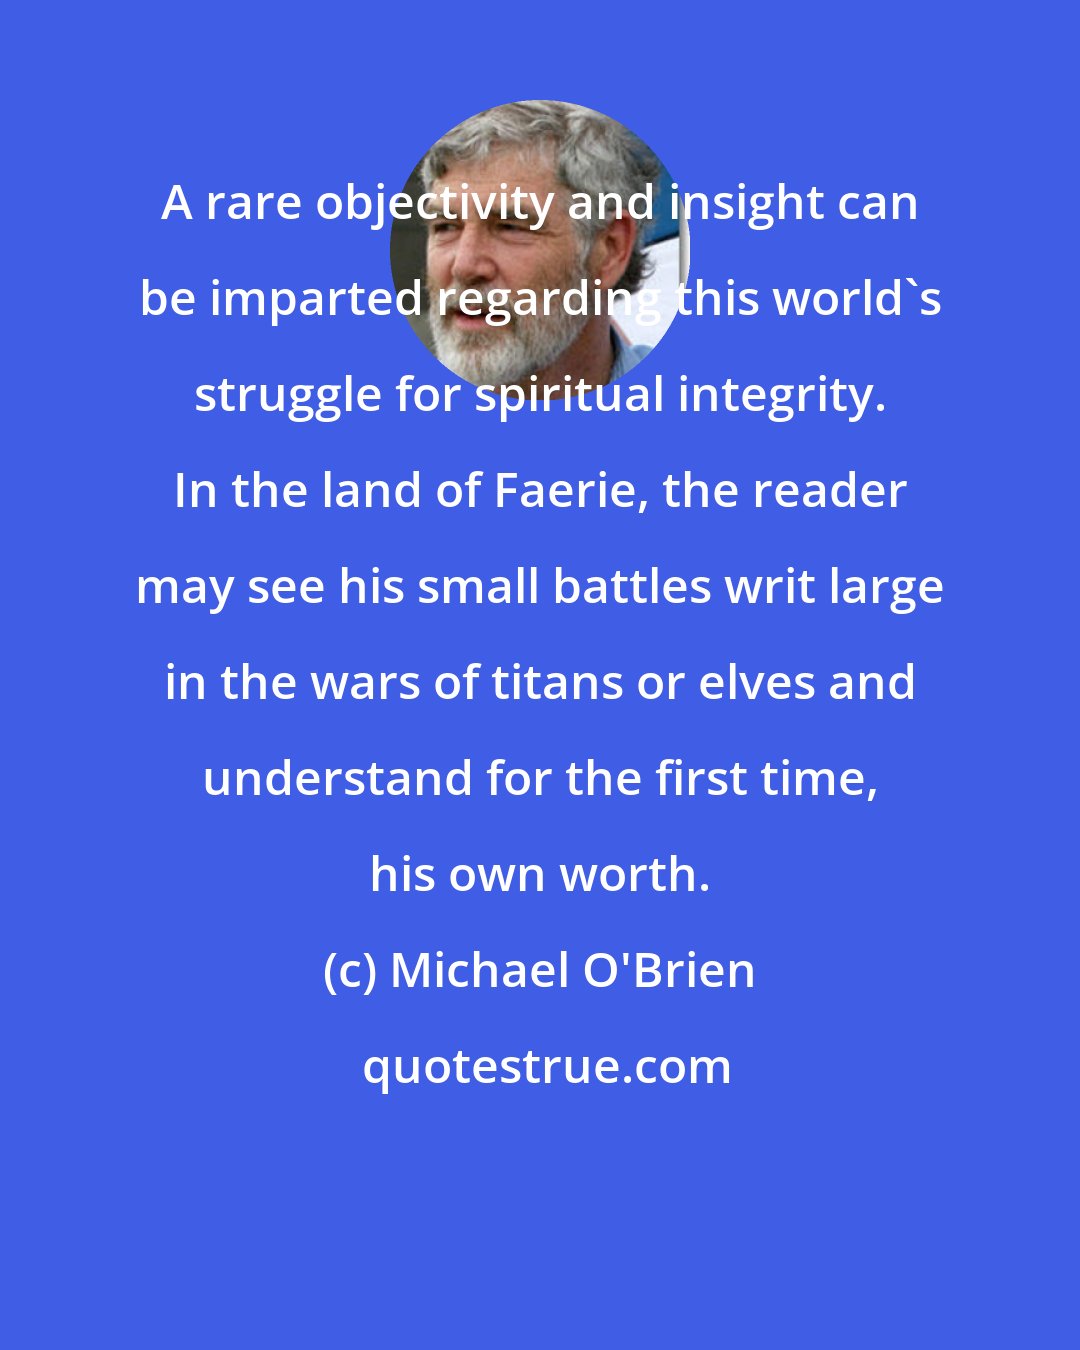 Michael O'Brien: A rare objectivity and insight can be imparted regarding this world's struggle for spiritual integrity. In the land of Faerie, the reader may see his small battles writ large in the wars of titans or elves and understand for the first time, his own worth.